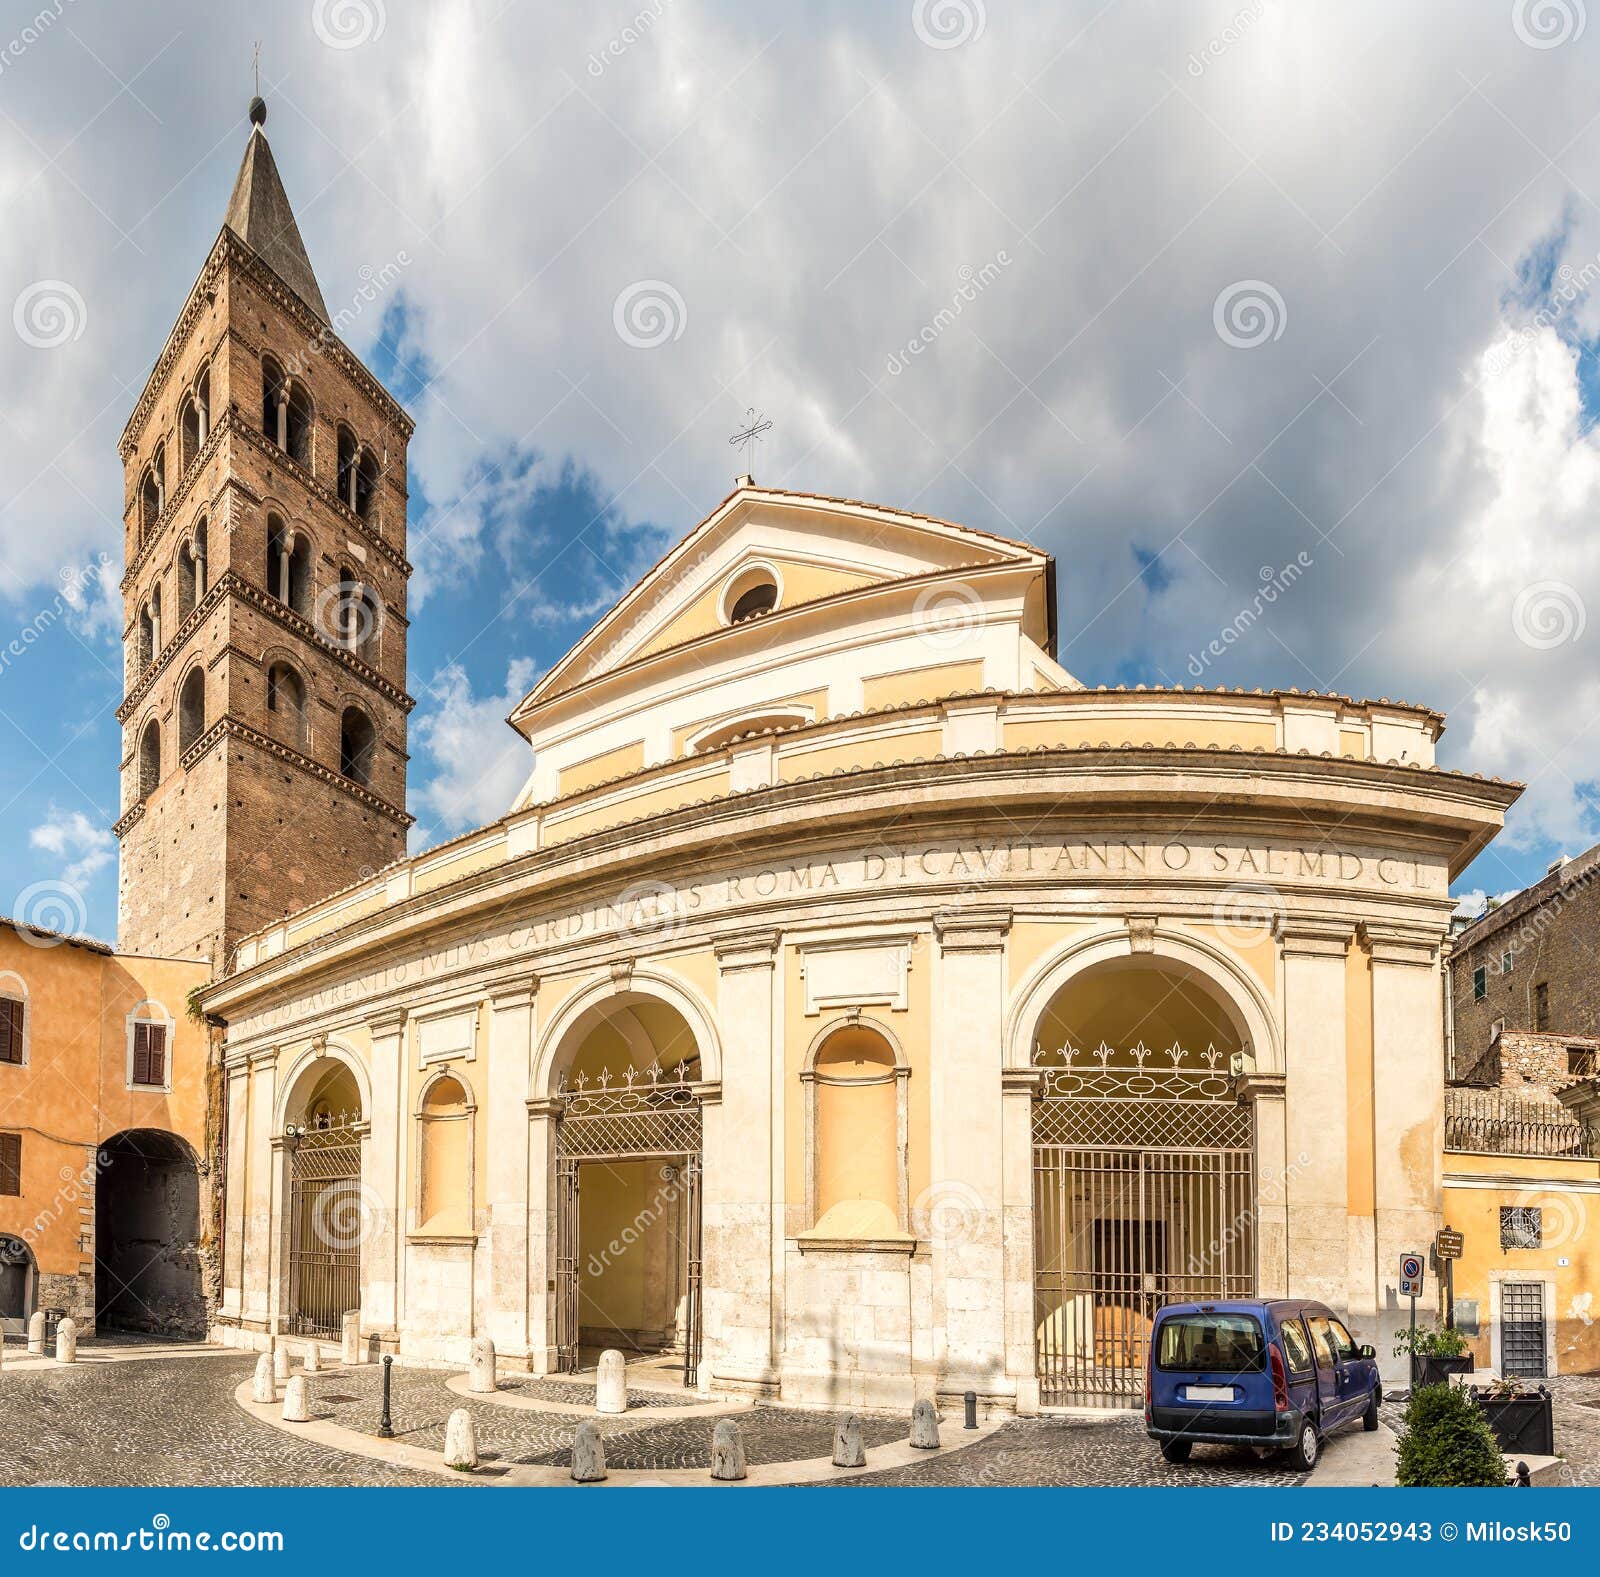 view at the cathedral of san lorenzo martir in the streets of tivoli town - italy